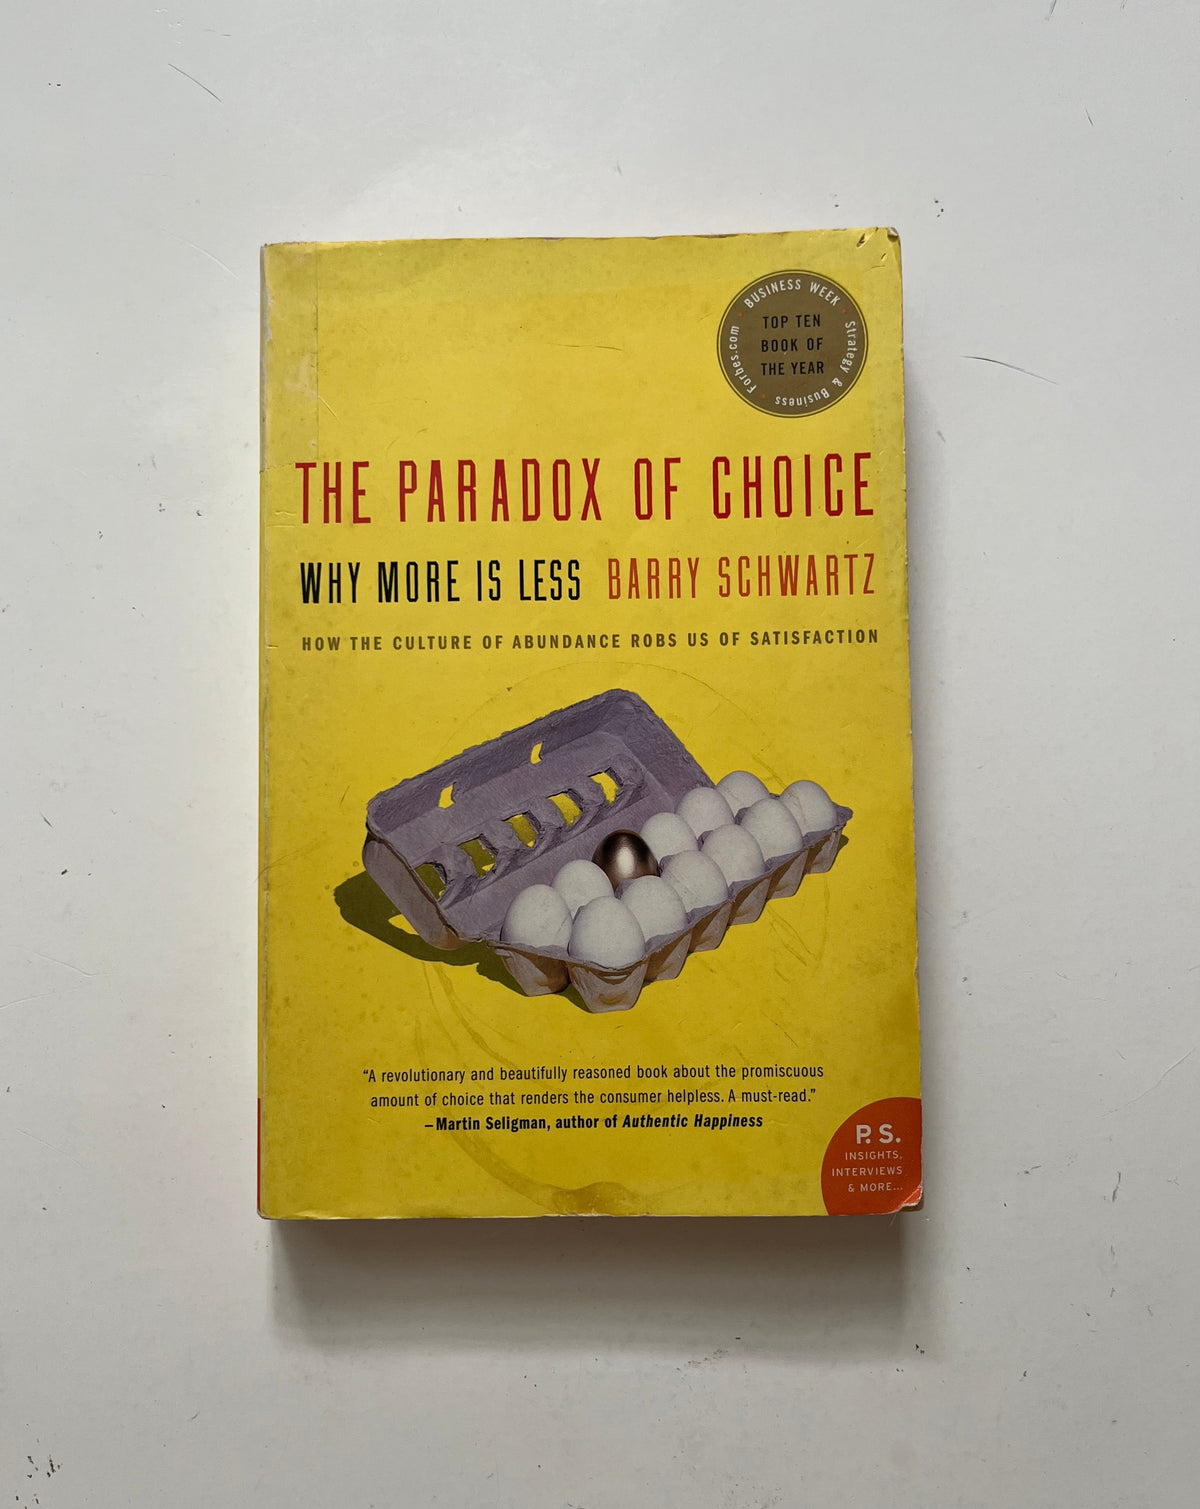 DONATE: The Paradox of Choice: Why More is Less (How the Culture of Abundance Robs Us of Satisfaction) by Barry Schwartz